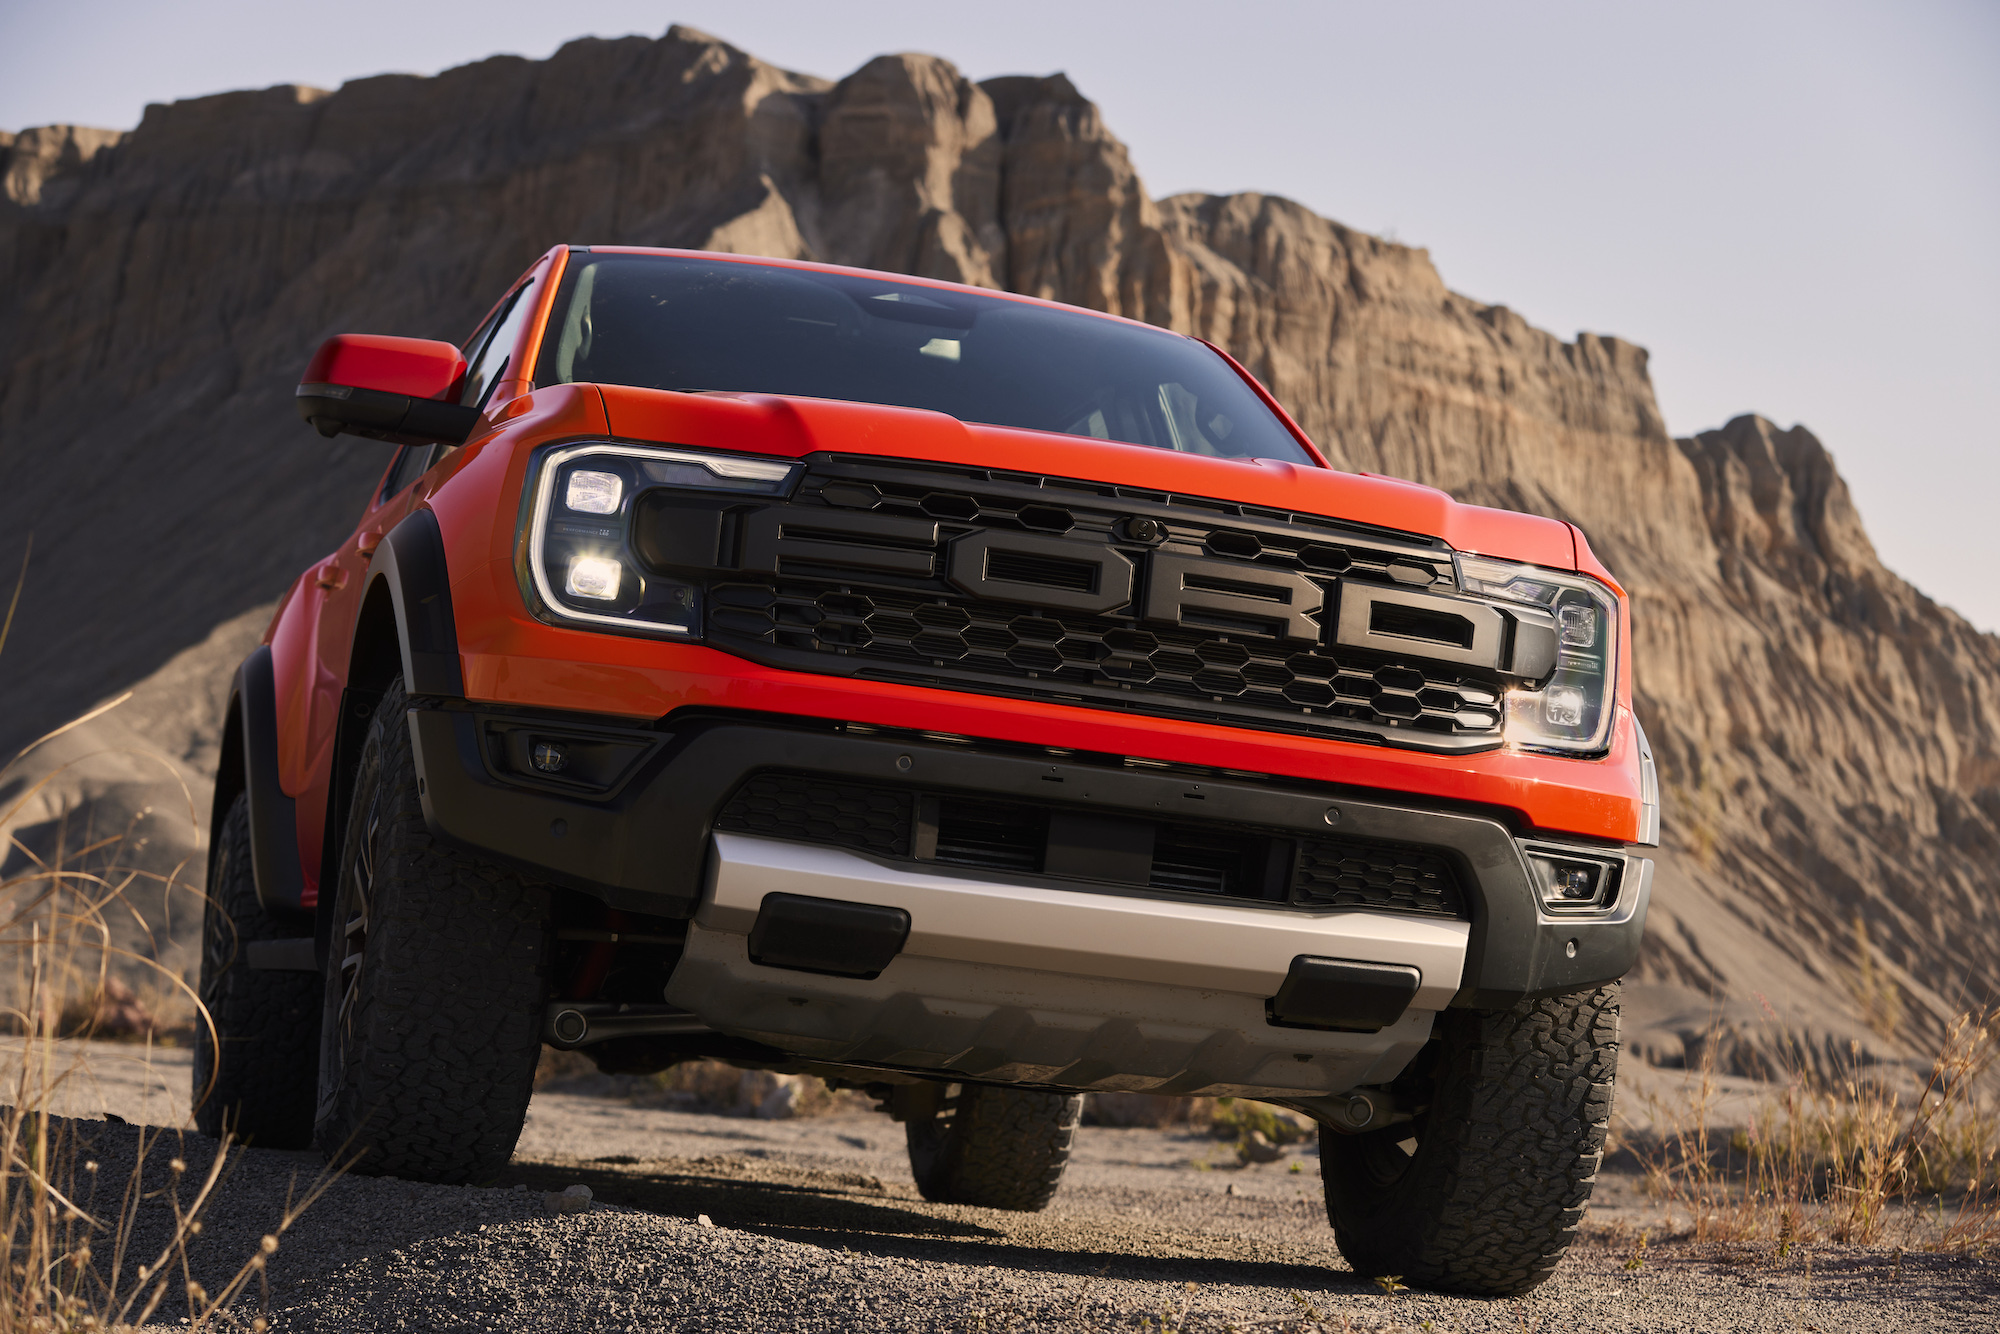 The Ford Ranger Raptor is finally coming to the US